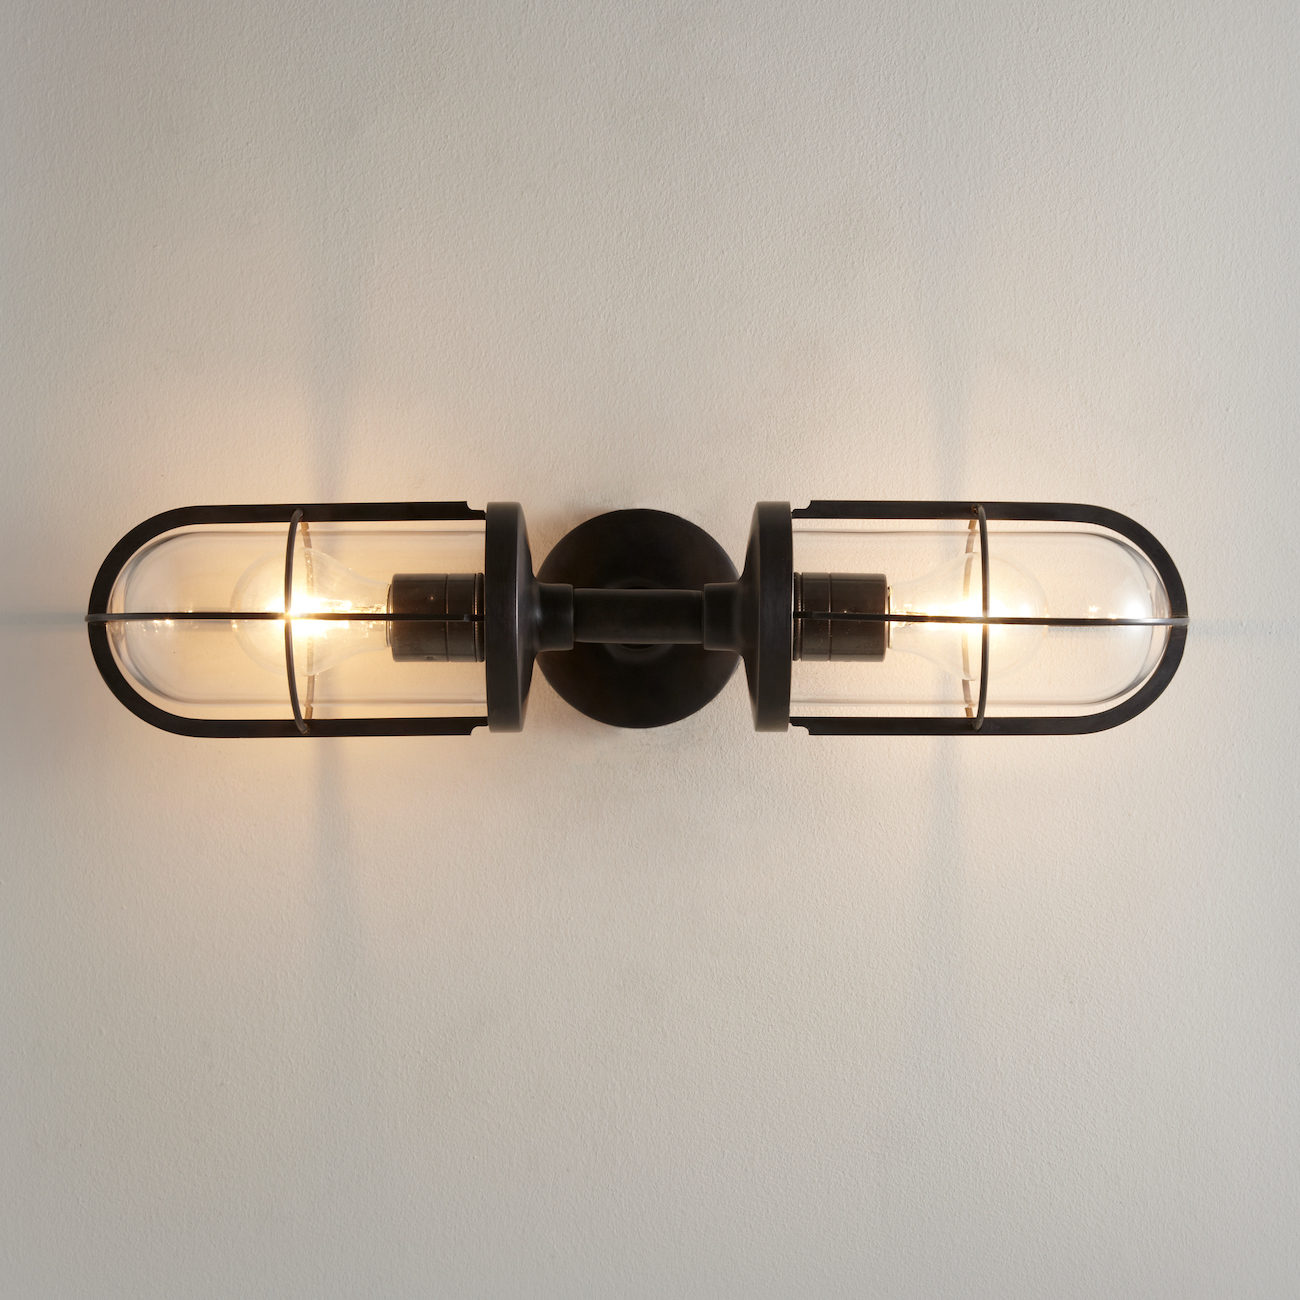 Two-Headed Light in Aluminium, Brass, or Plated Chrome 7208